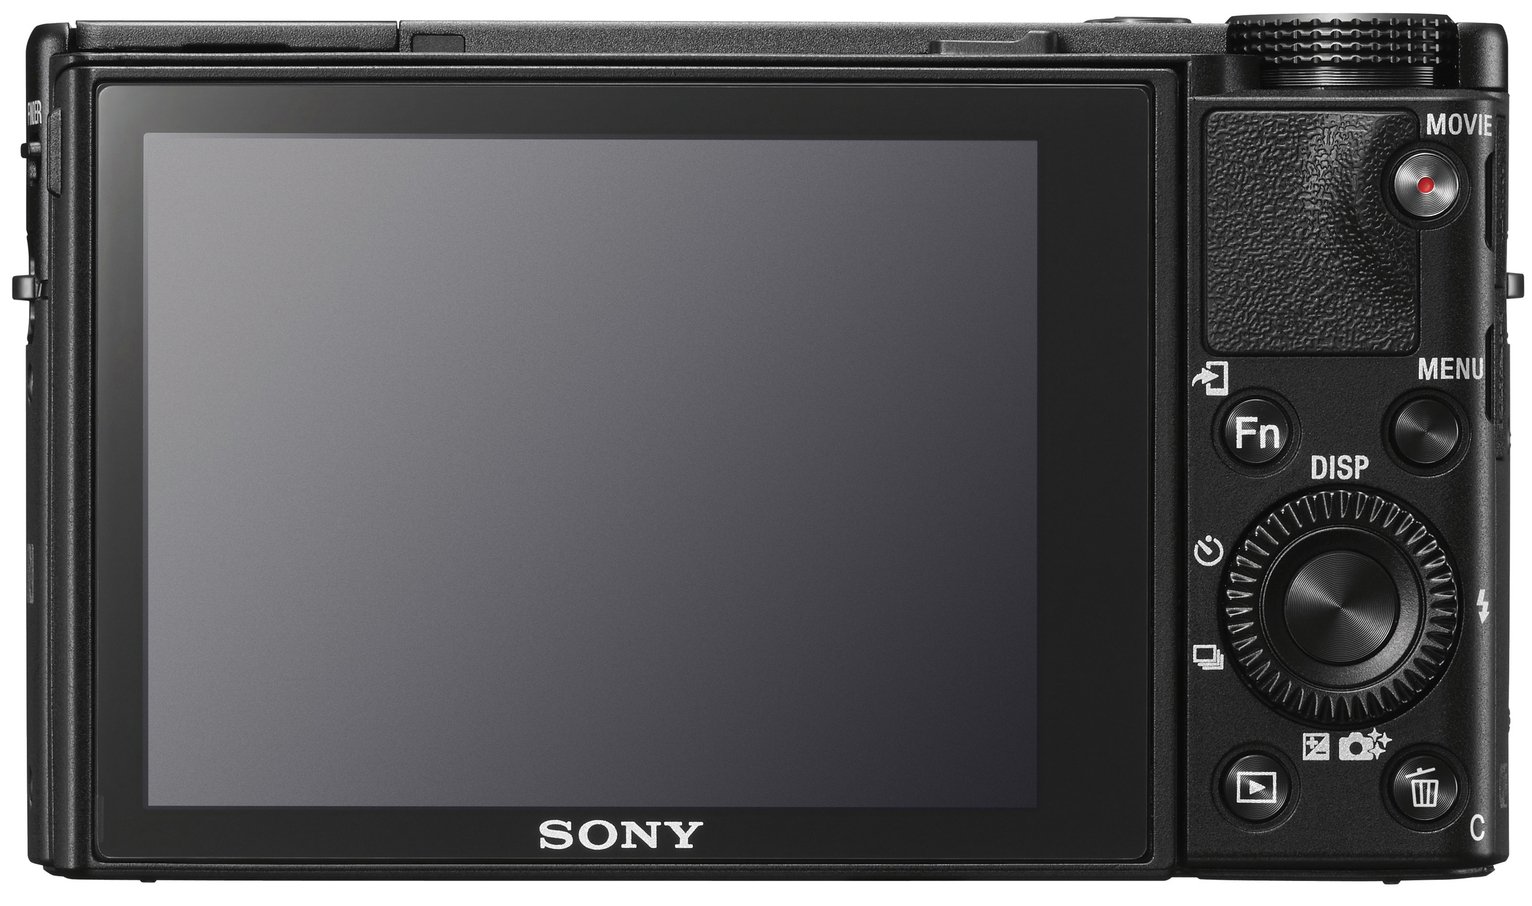 Sony RX100 M5-A Premium Compact Camera Review